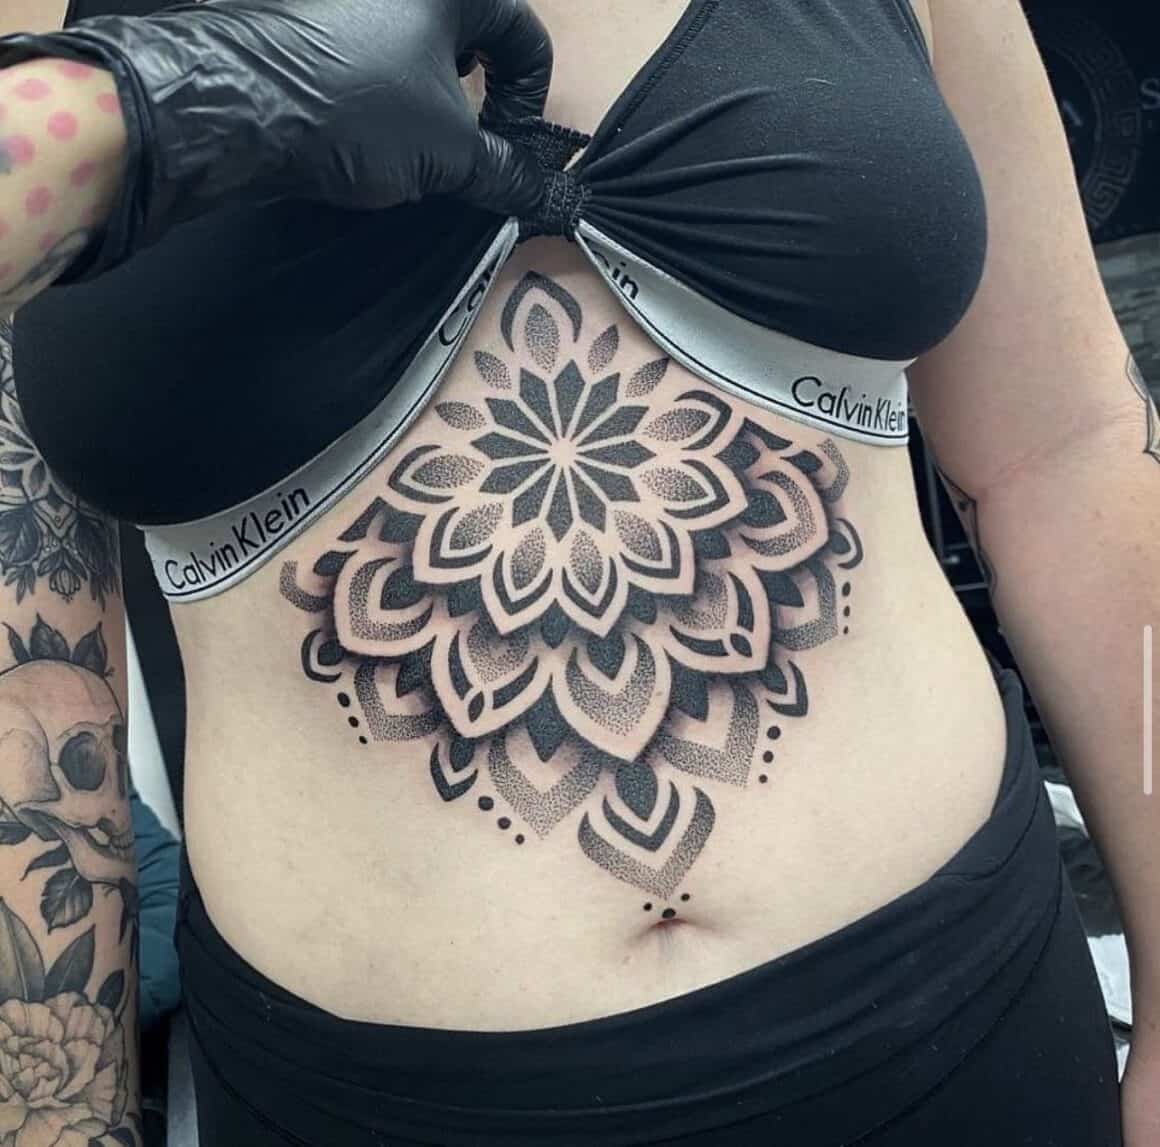 15 Underboob Tattoo Ideas for Your Next Session | Darcy